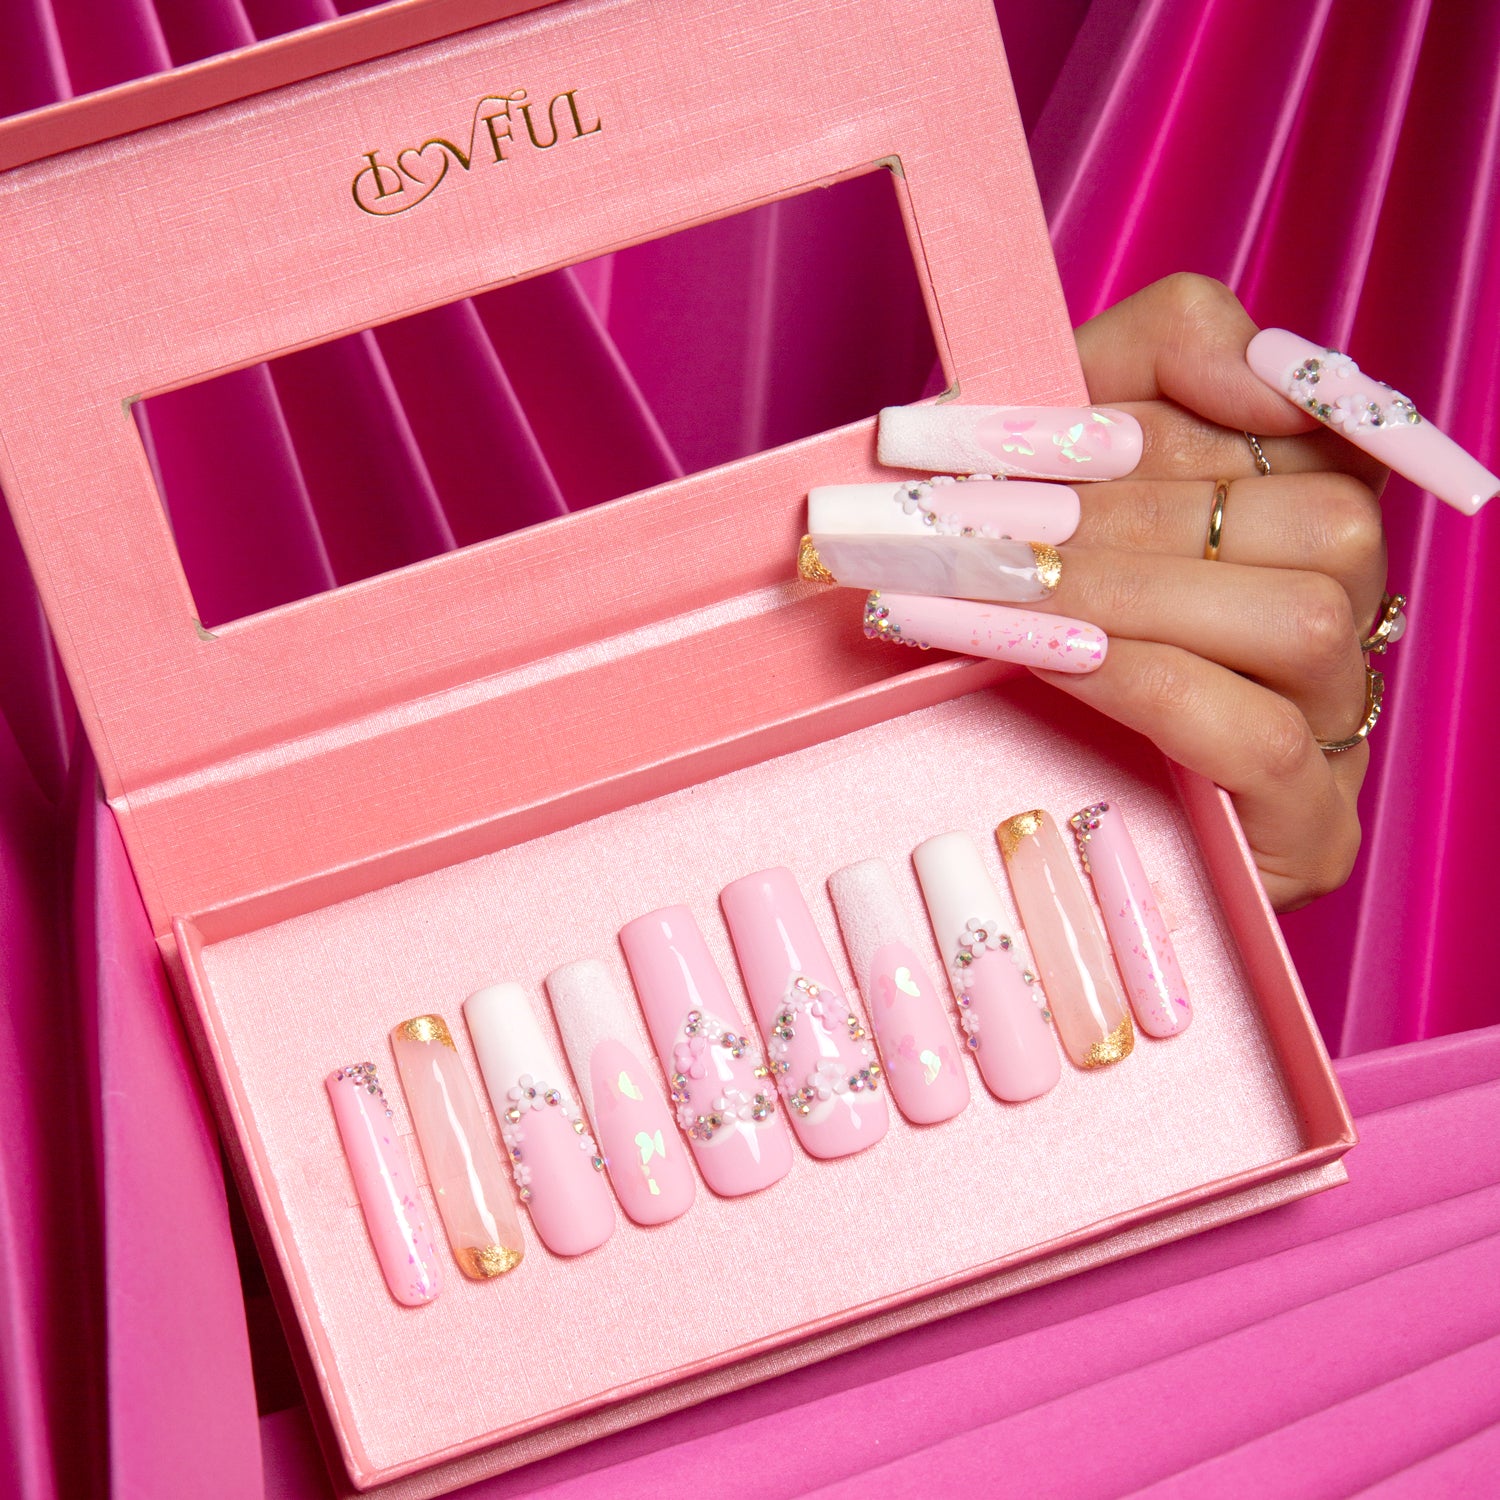 Lovful press-on acrylic nails set in light pink with French tips and heart-shaped flower designs in an elegant pink box. Ideal for bridal wear.